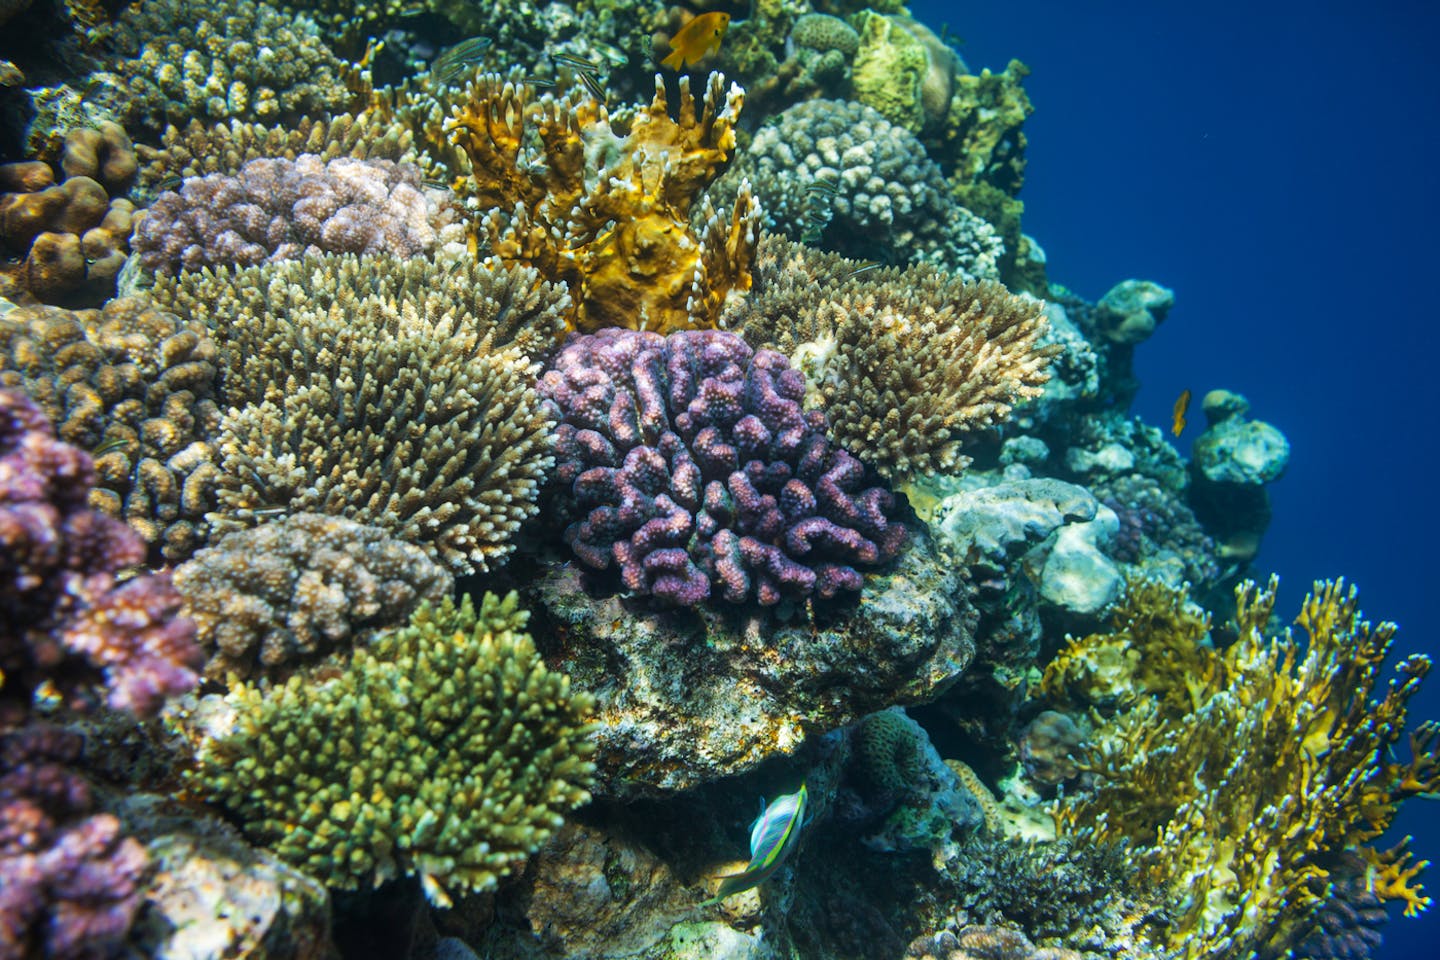 The roadmap to saving coral reefs with the innovative Allen Coral Atlas